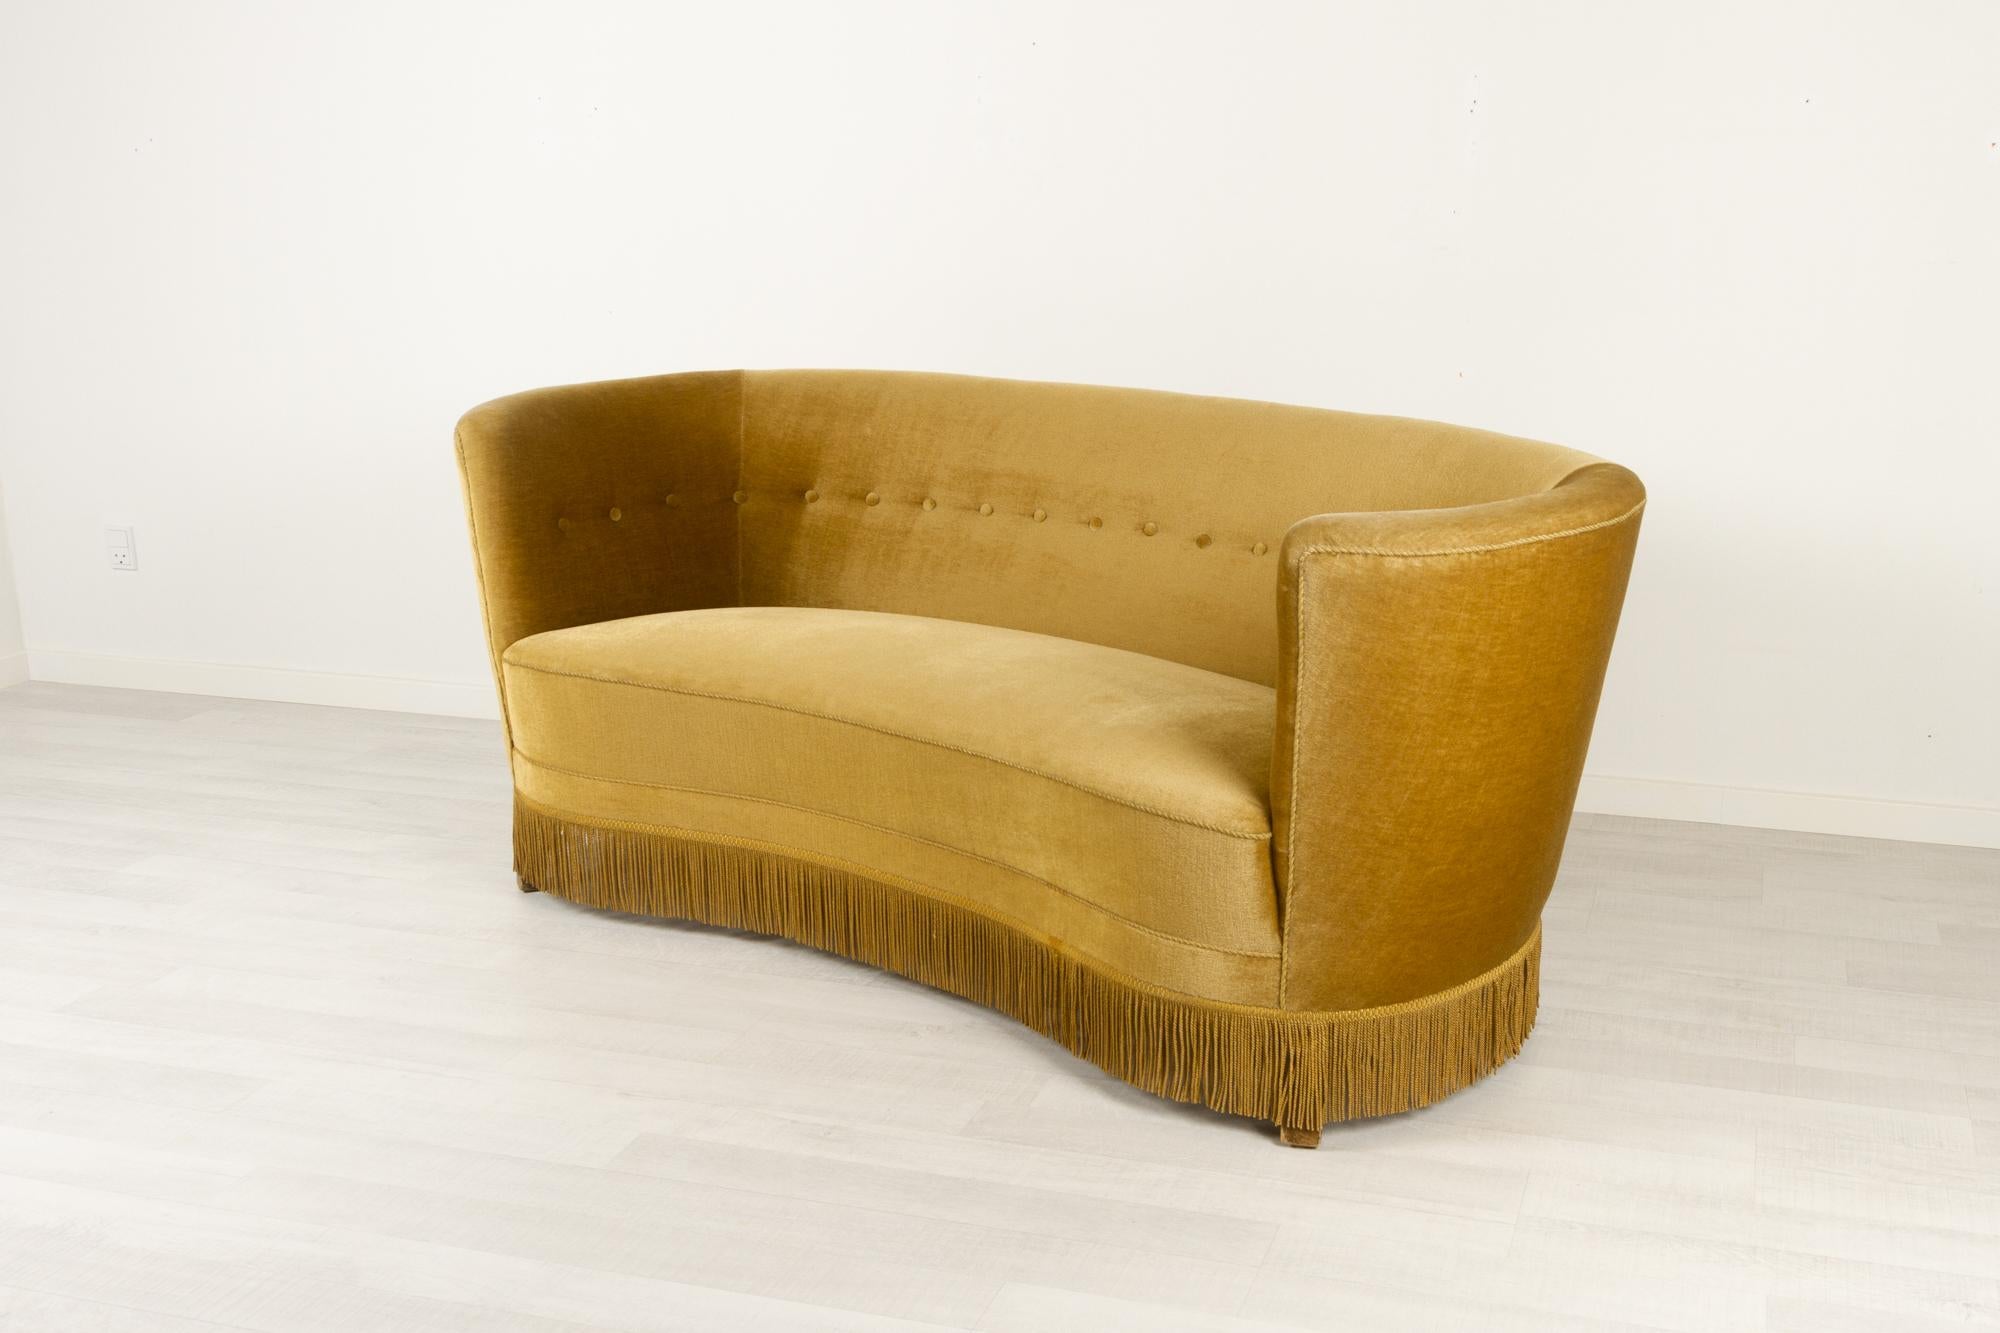 Danish banana sofa, 1940s
Vintage Danish banana-shaped loveseat upholstered in green/beige/gold velvet. Curved two-seater with original spring and velour upholstery, base edged with fringes. Feet in stained beech.
Very good original condition.